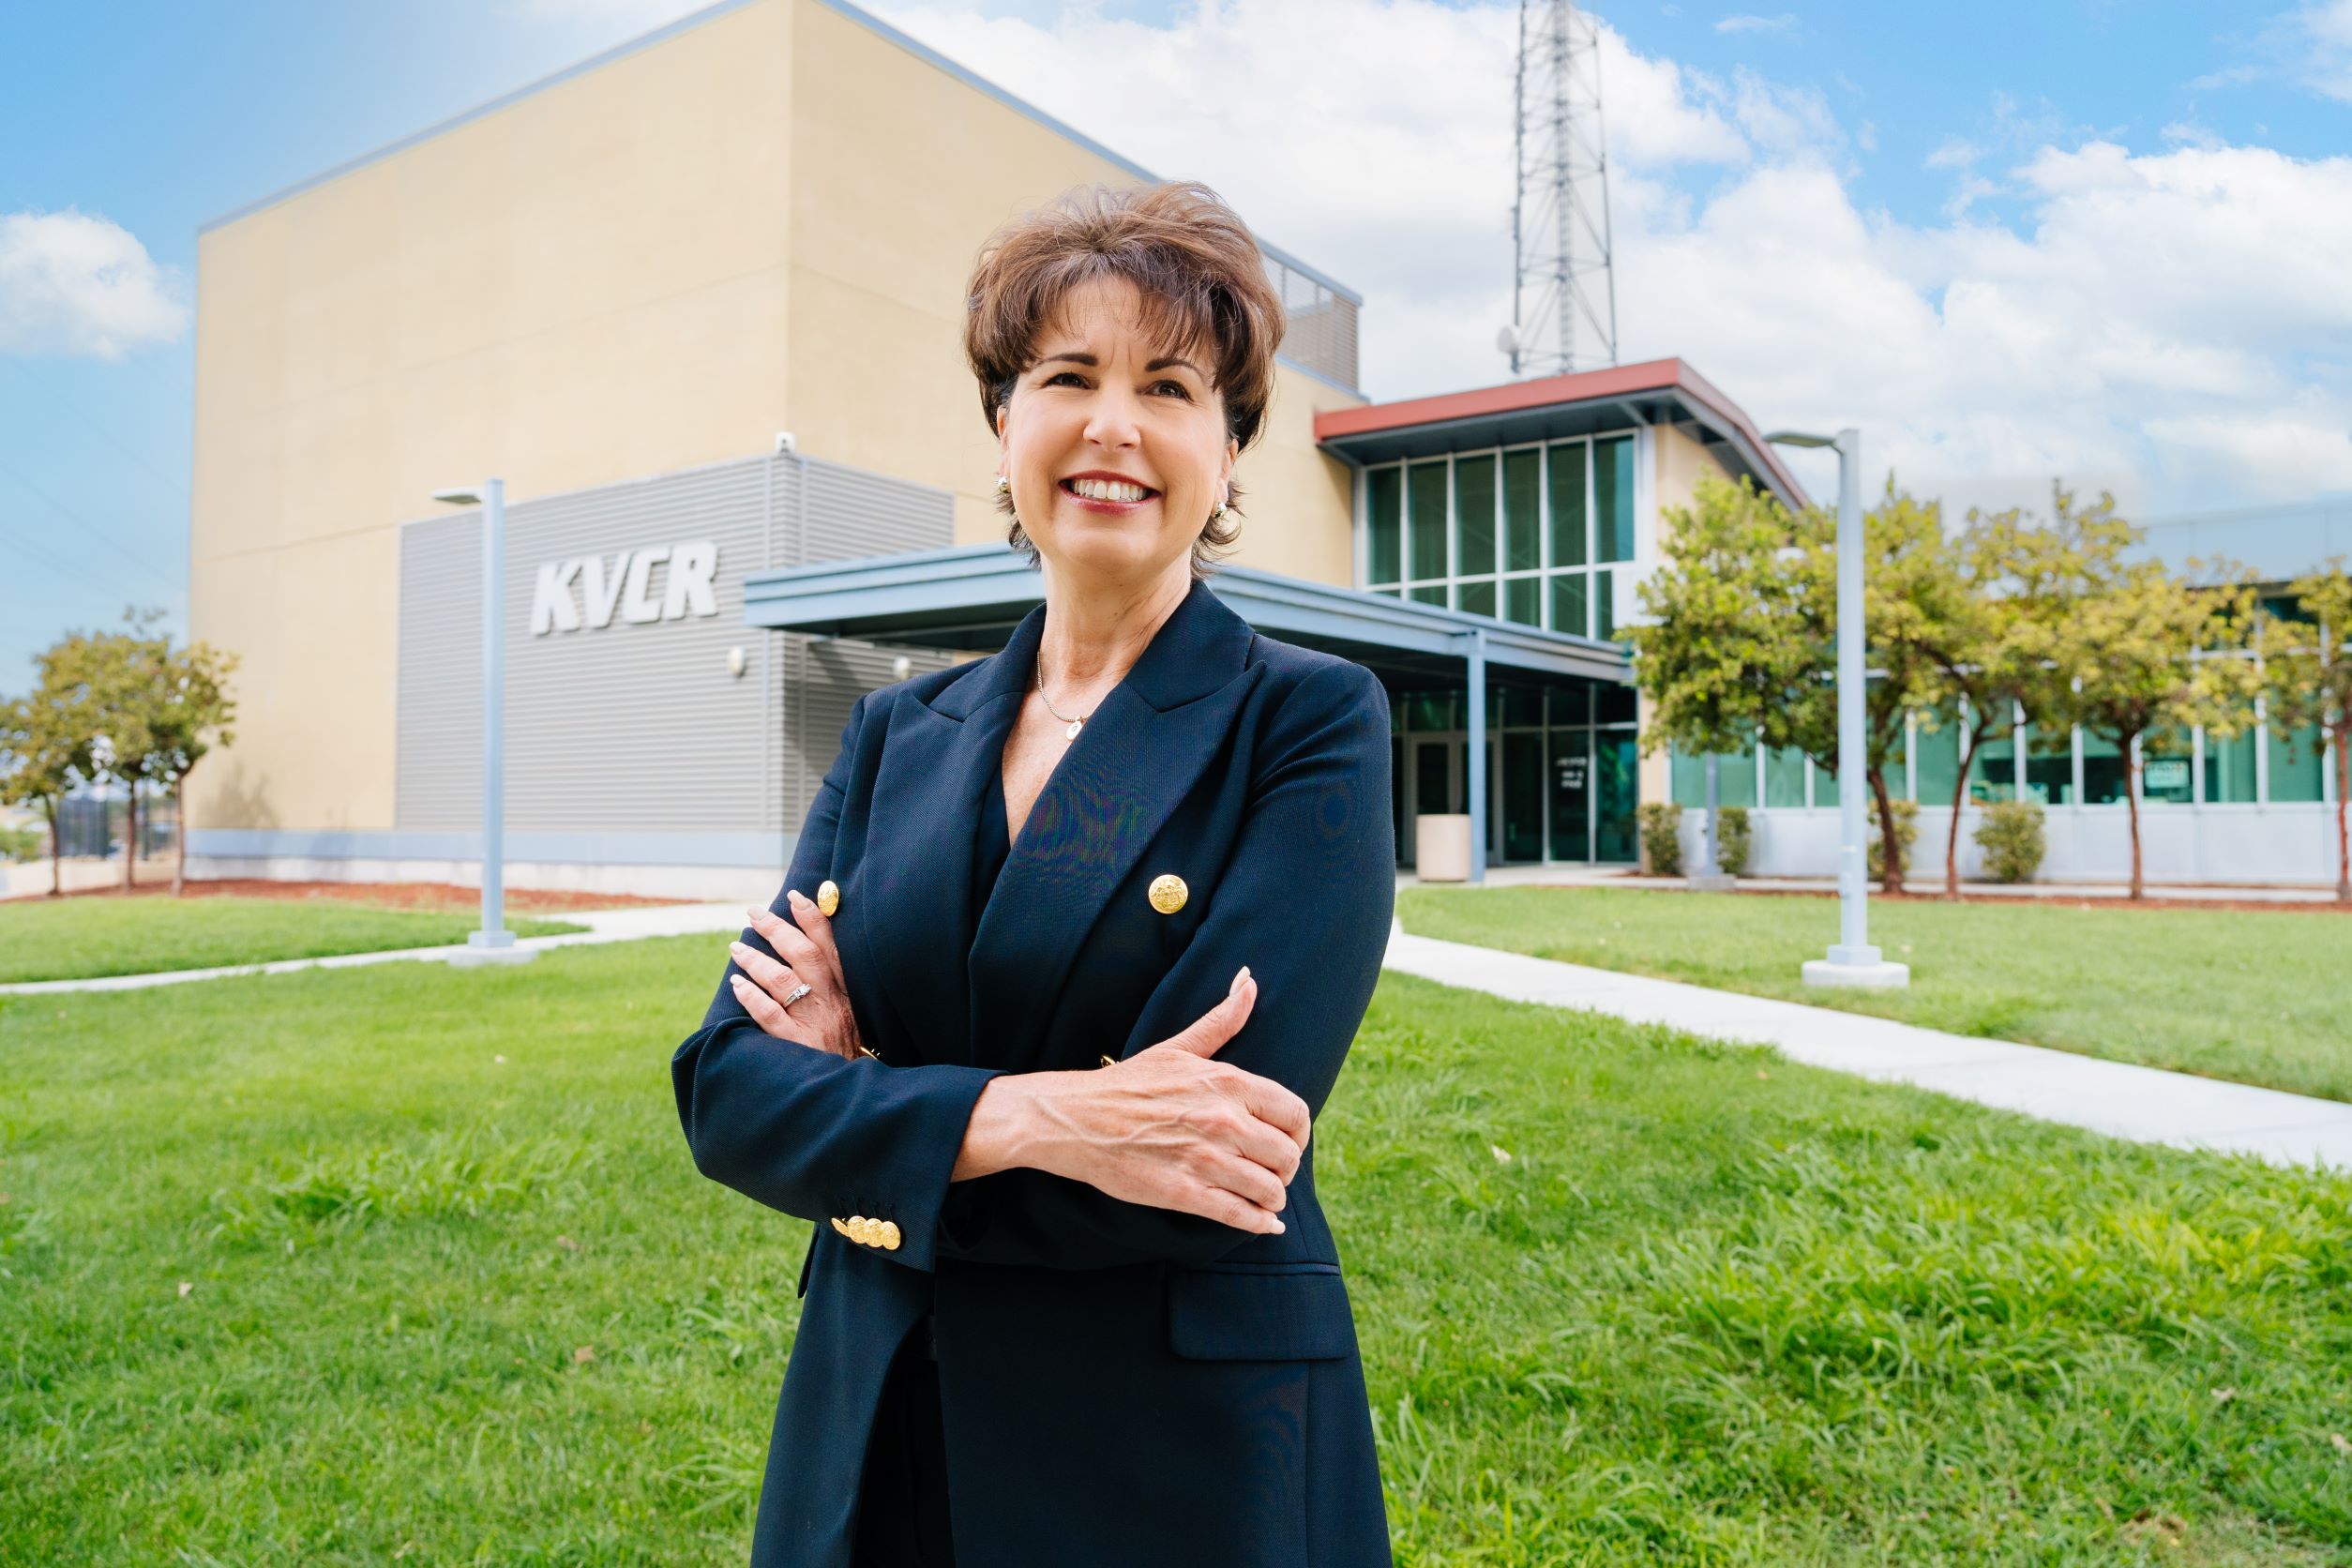 Connie Leyva in front of the KVCR studio, located at San Bernardino Valley College